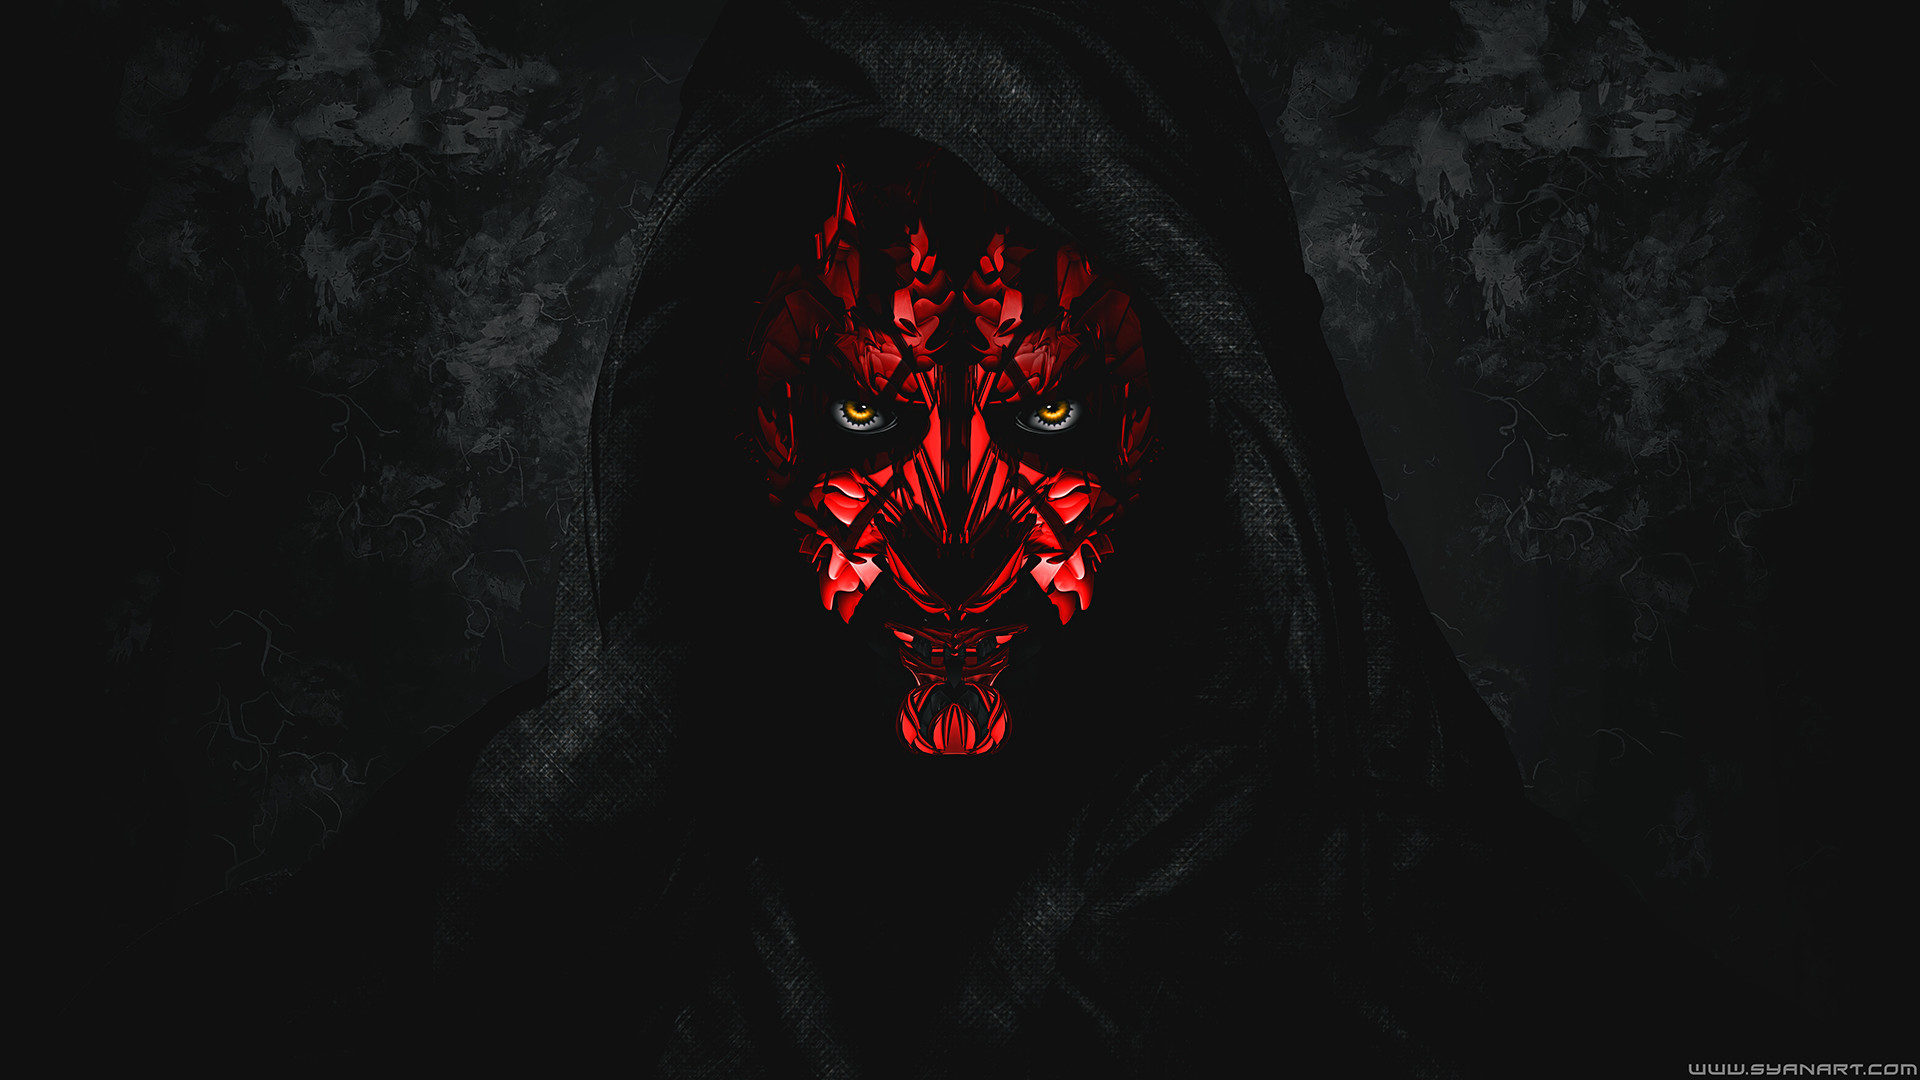 Darth Maul Wallpaper The Best Image In